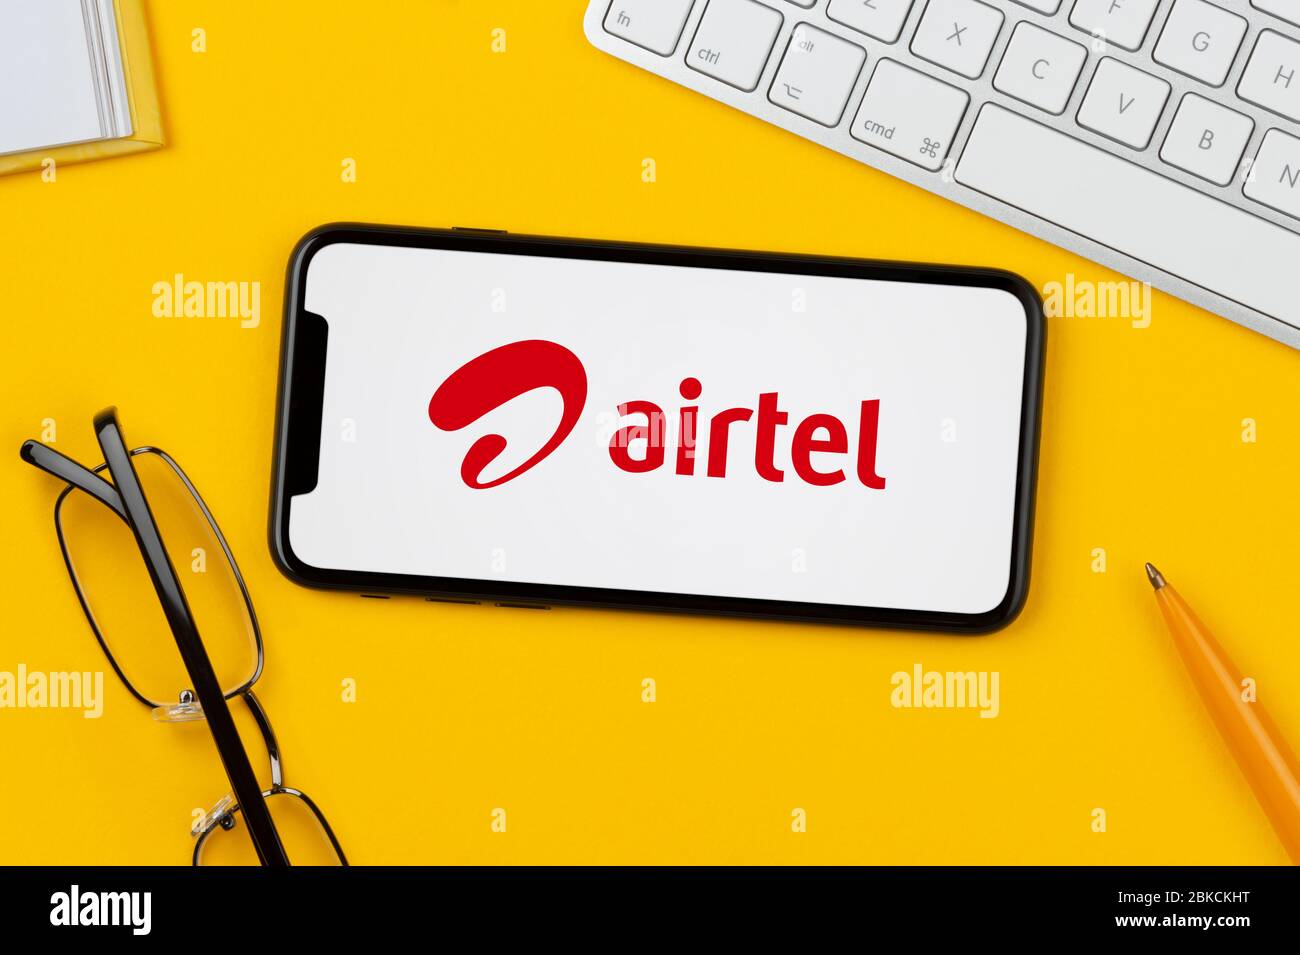 A smartphone showing the Bharti Airtel logo rests on a yellow background along with a keyboard, glasses, pen and book (Editorial use only). Stock Photo